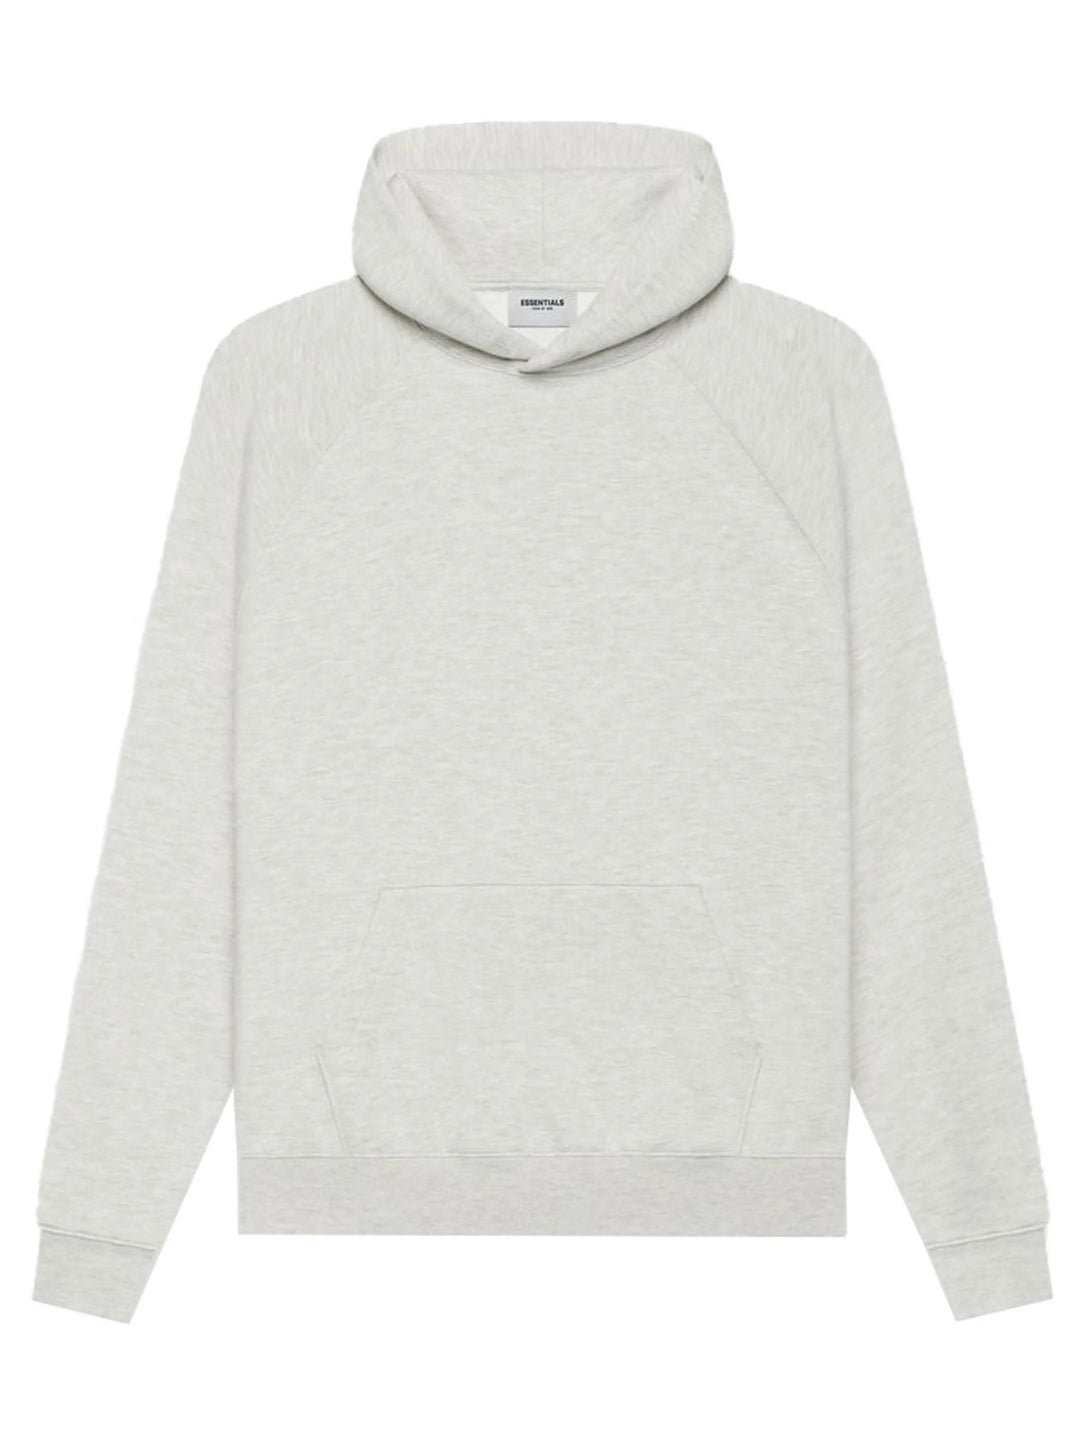 Fear Of God Essentials Back Logo Hoodie Light Heather Oatmeal [SS21] Prior